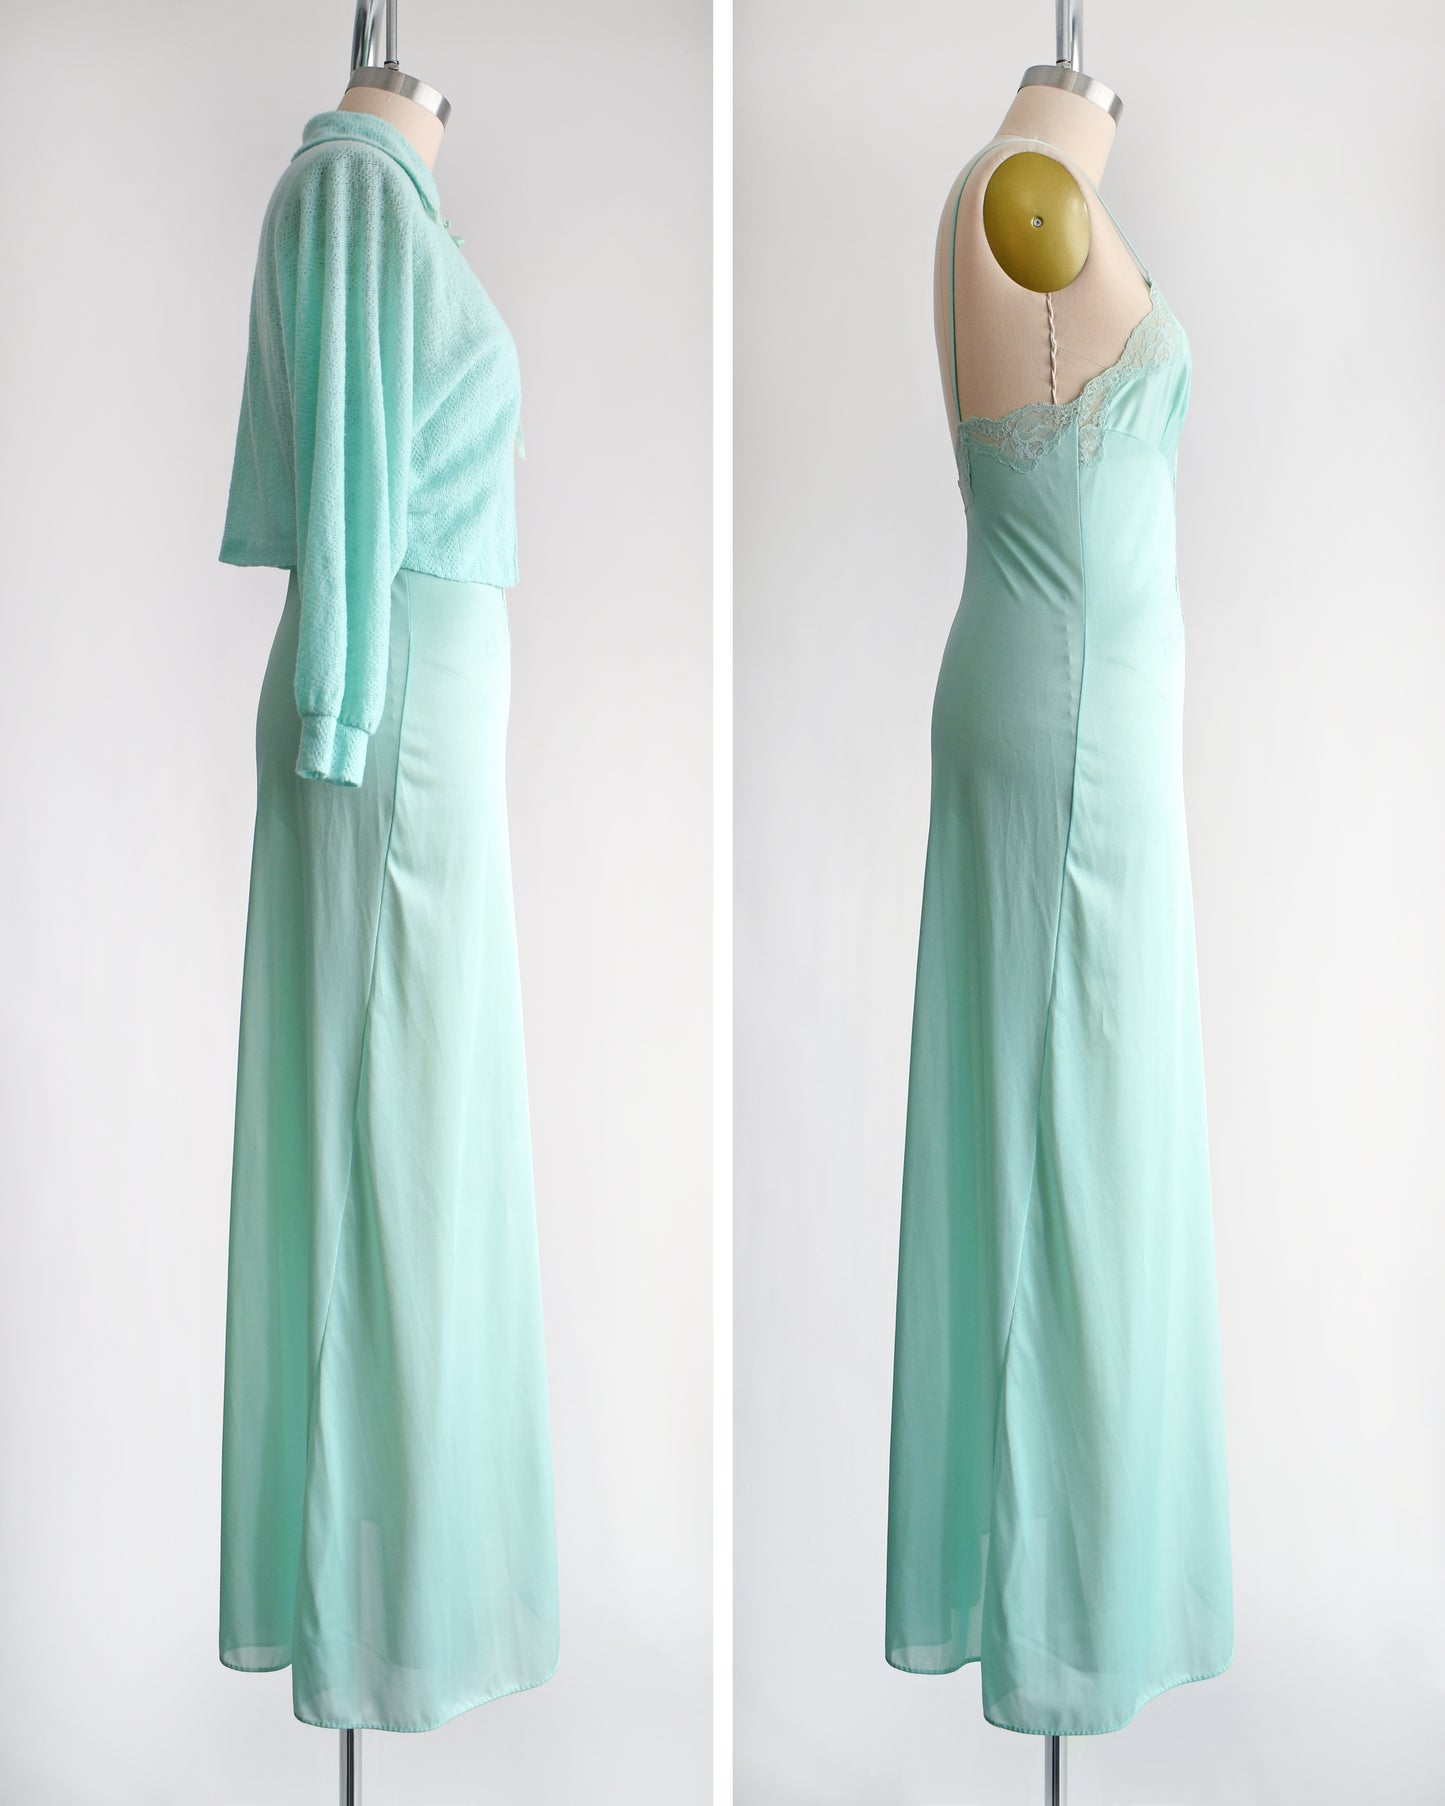 Side by side views of the side of a vintage 1970s mint green nightgown and bed jacket set. The left photo shows the bed jacket and nightgown together